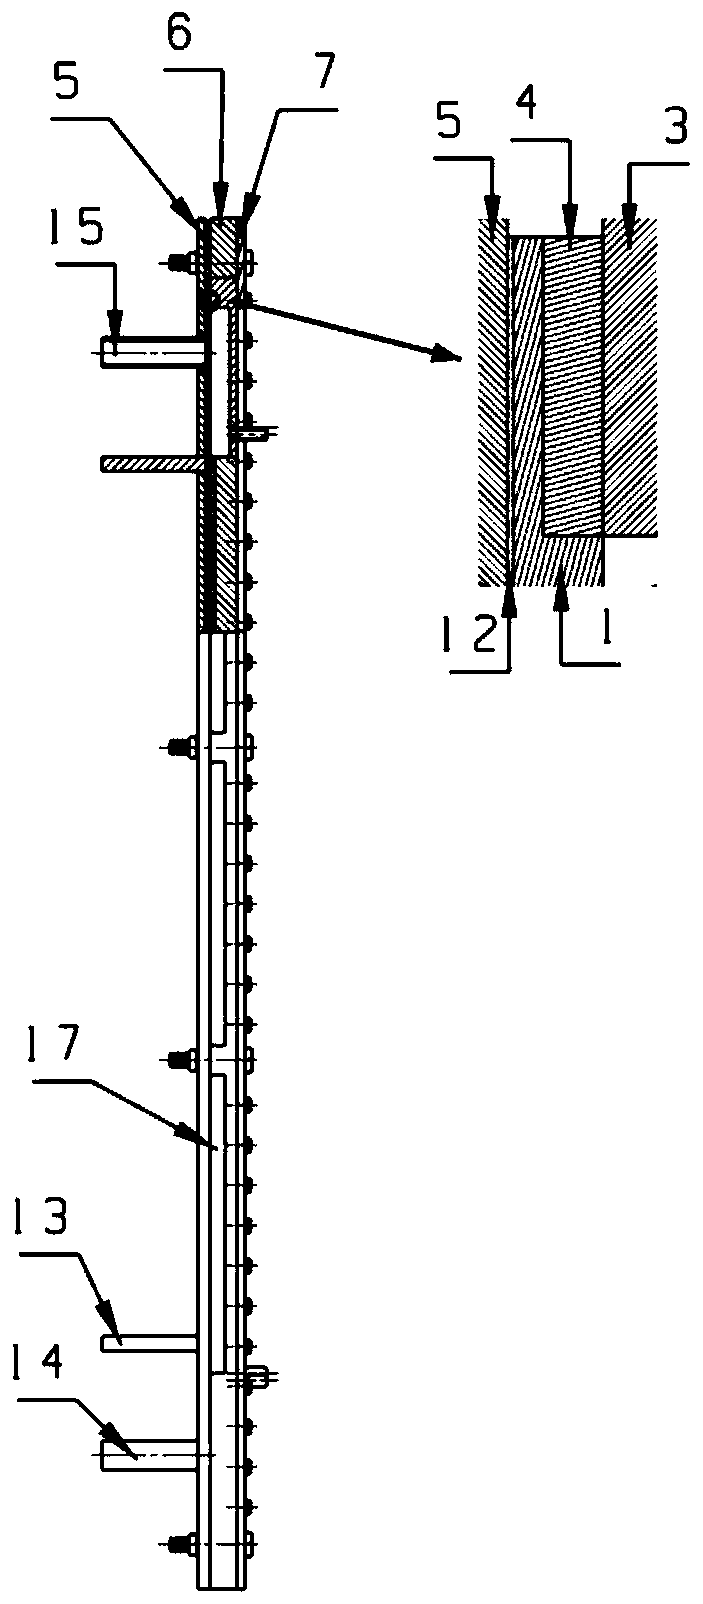 Flow field-temperature field synchronous measurement system under narrow rectangular channel blocking condition